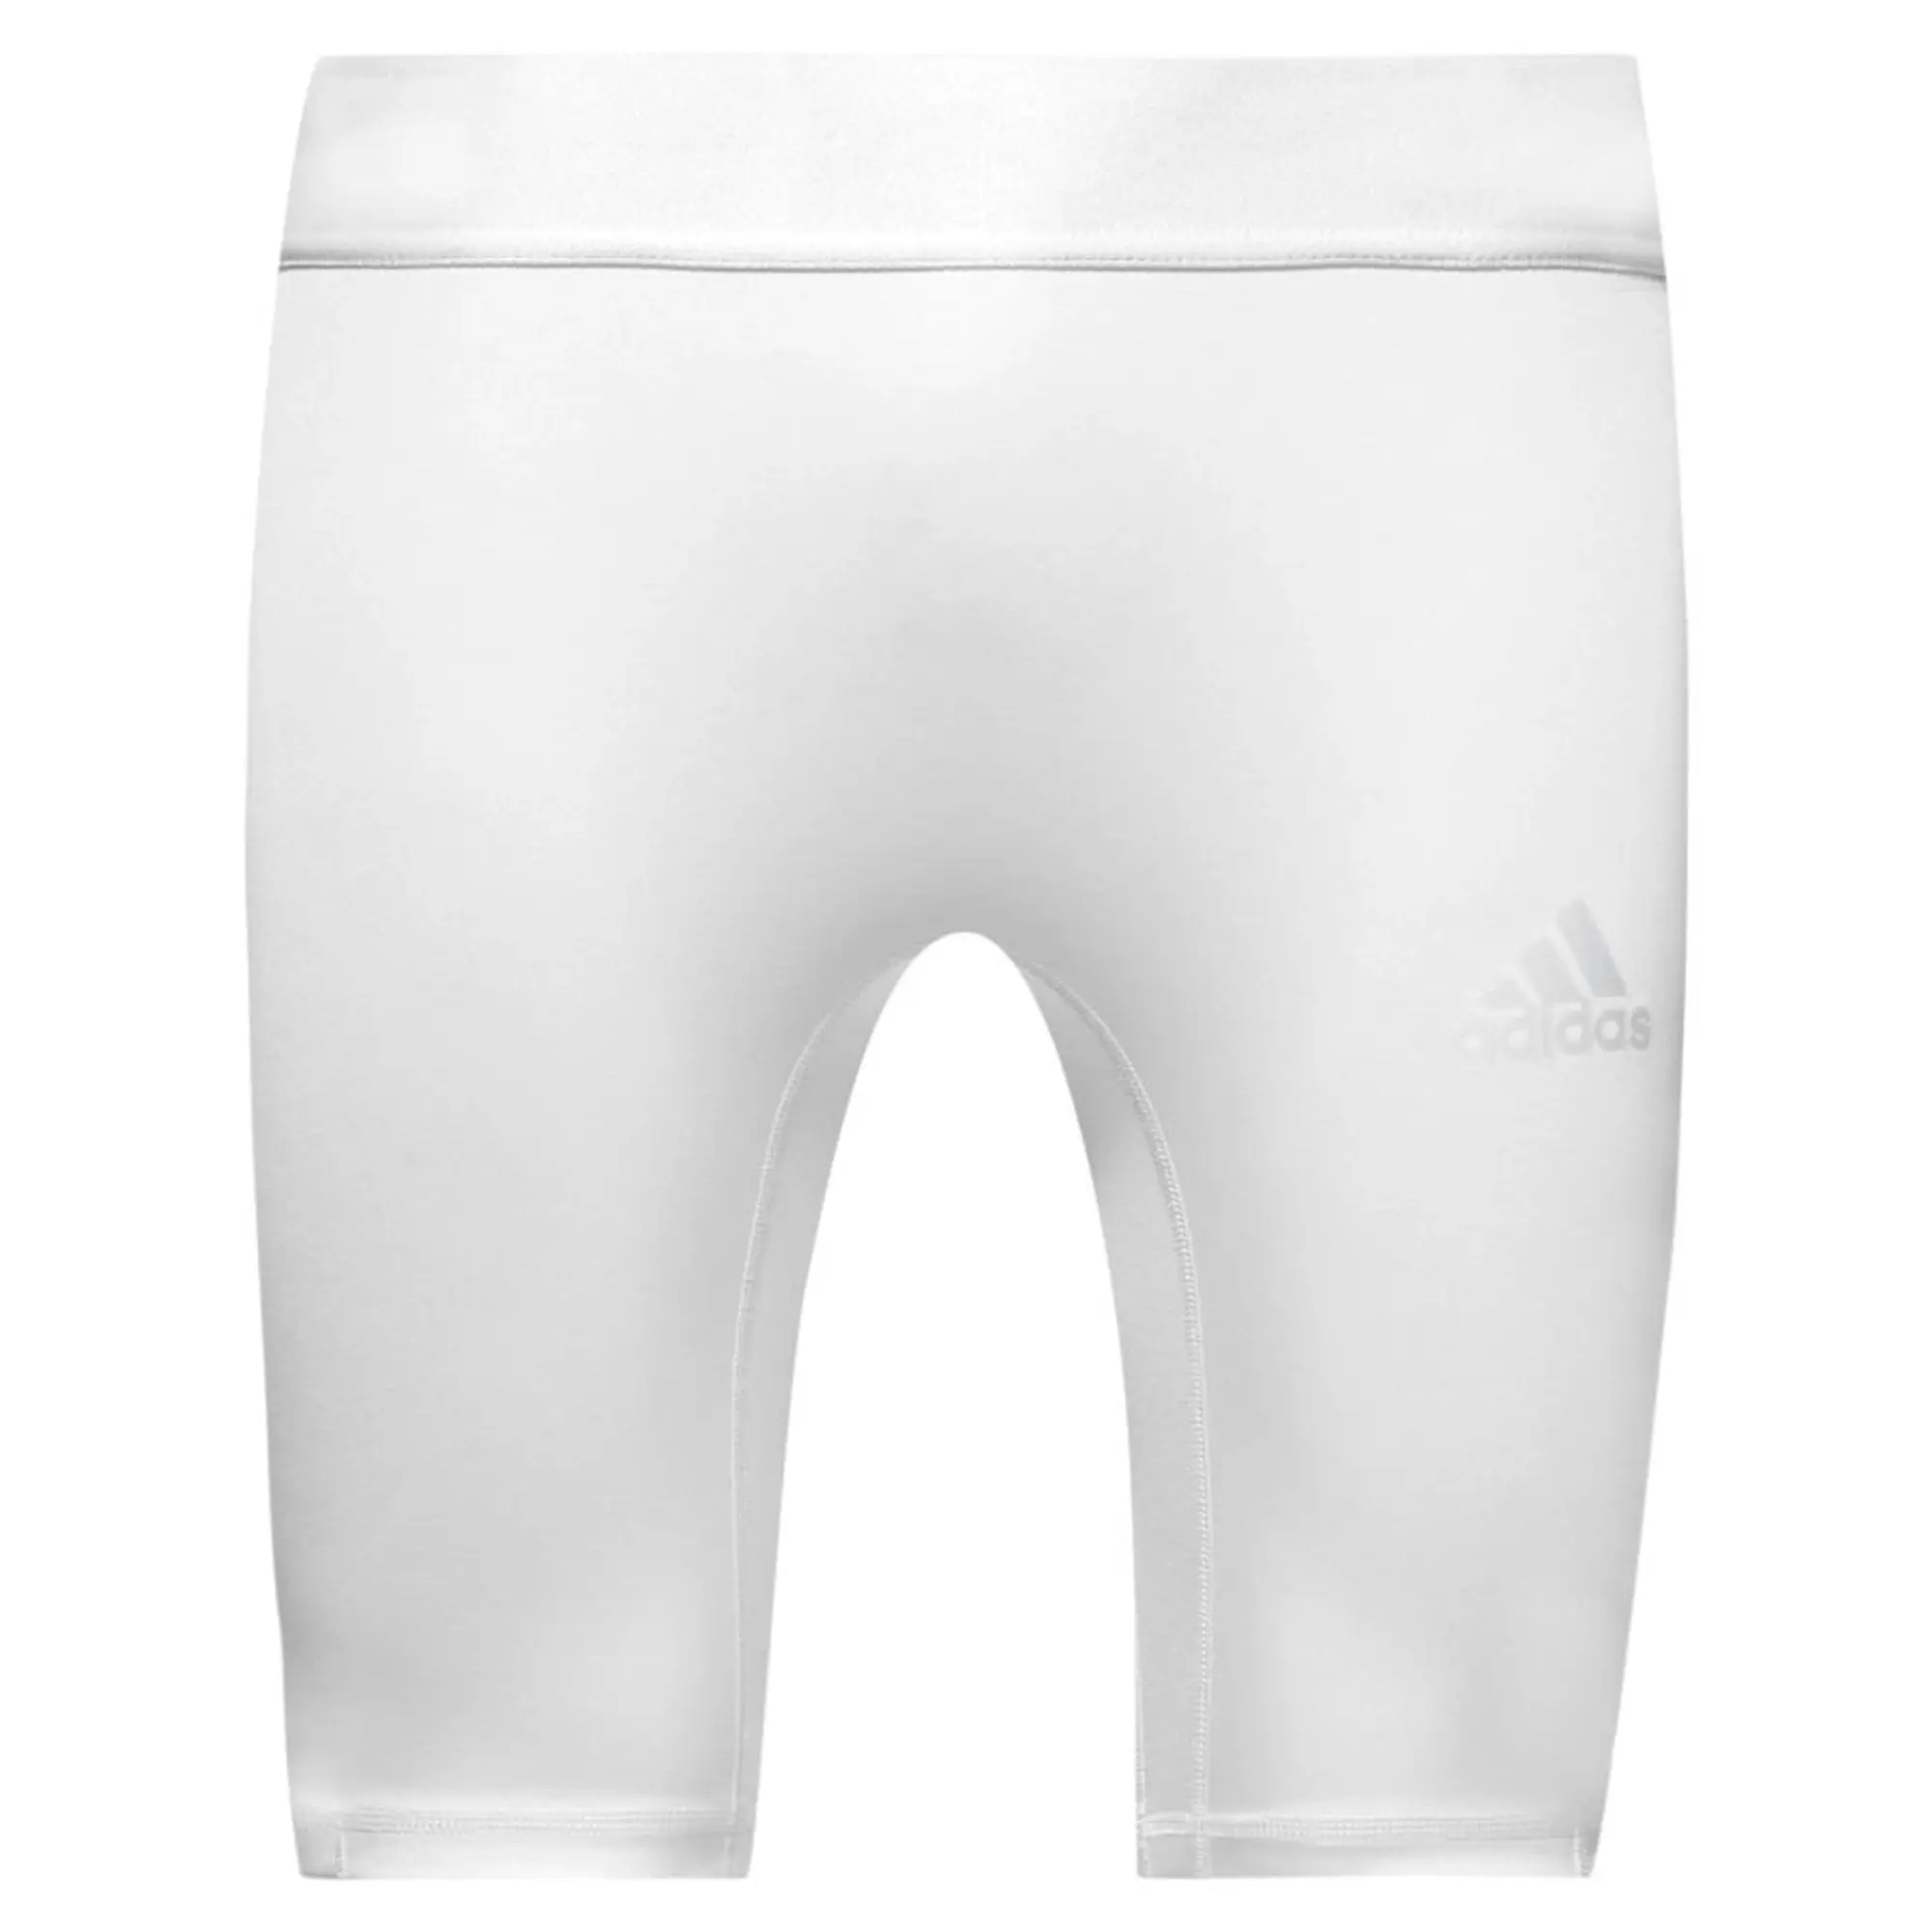 Adidas Baselayer Climacool Alphaskin Sport Tights - White